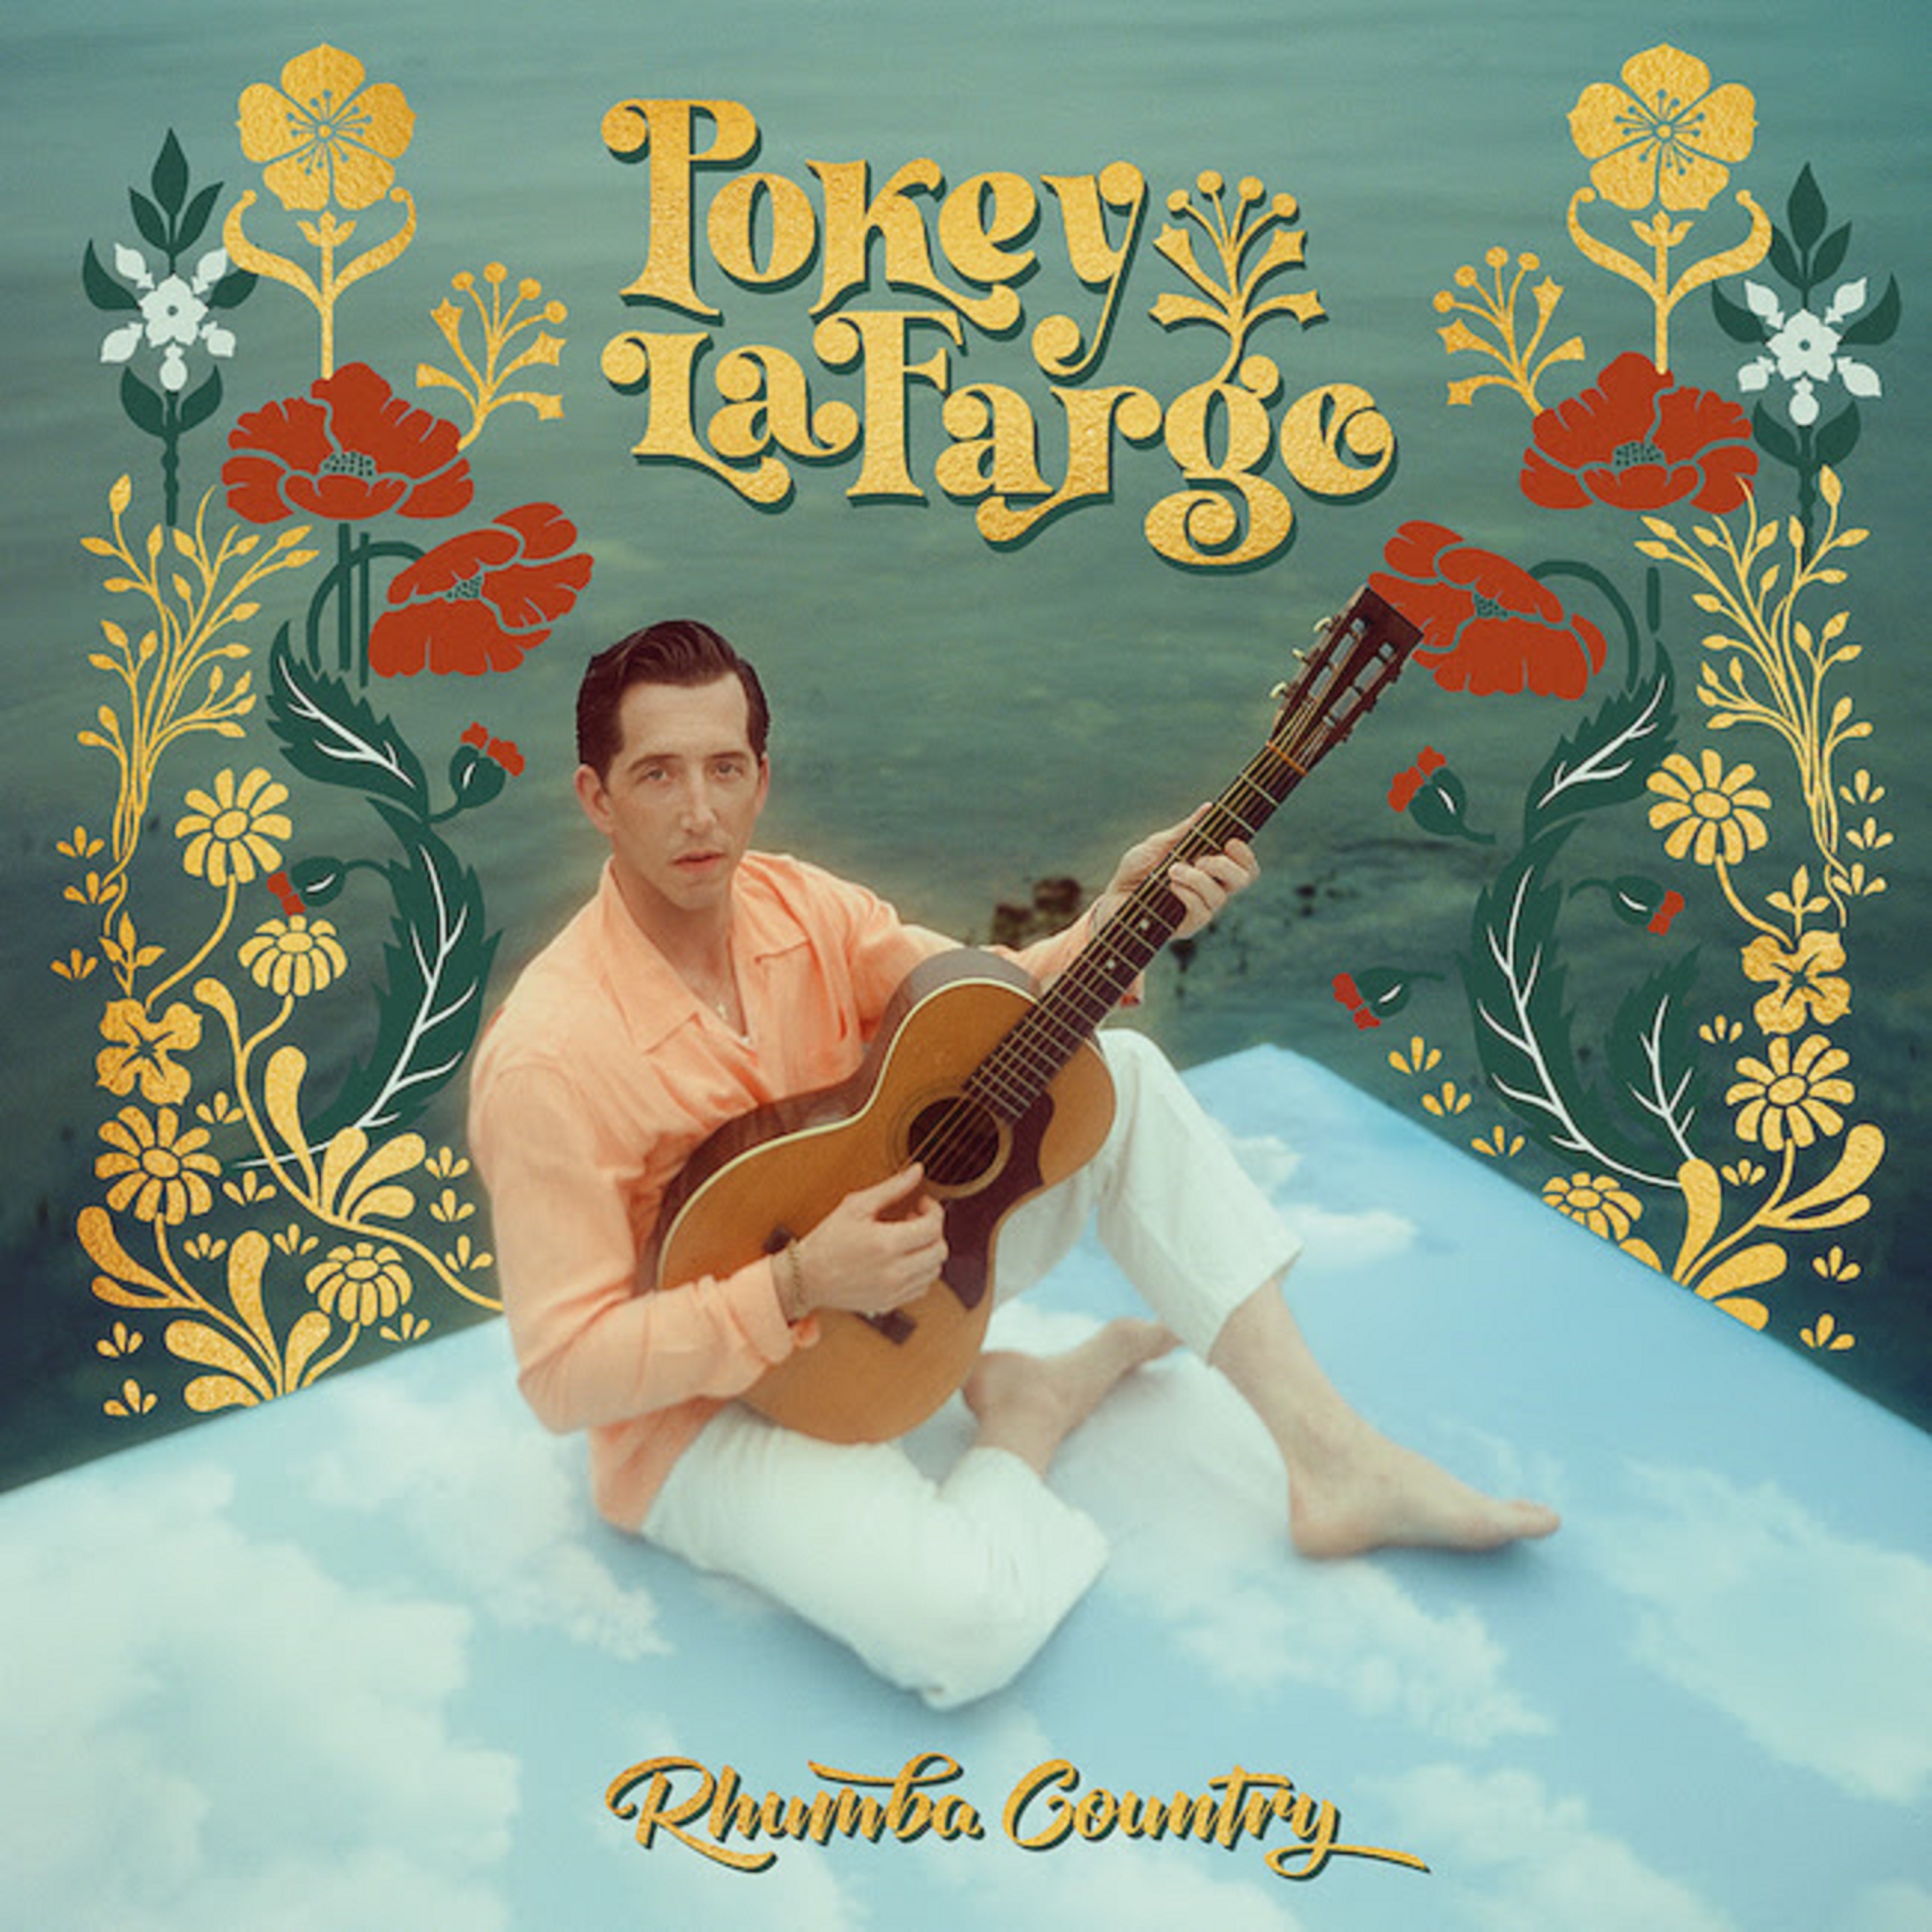 Pokey LaFarge Returns With "Rhumba Country" May 10 - Releases "One You, One Me" Video